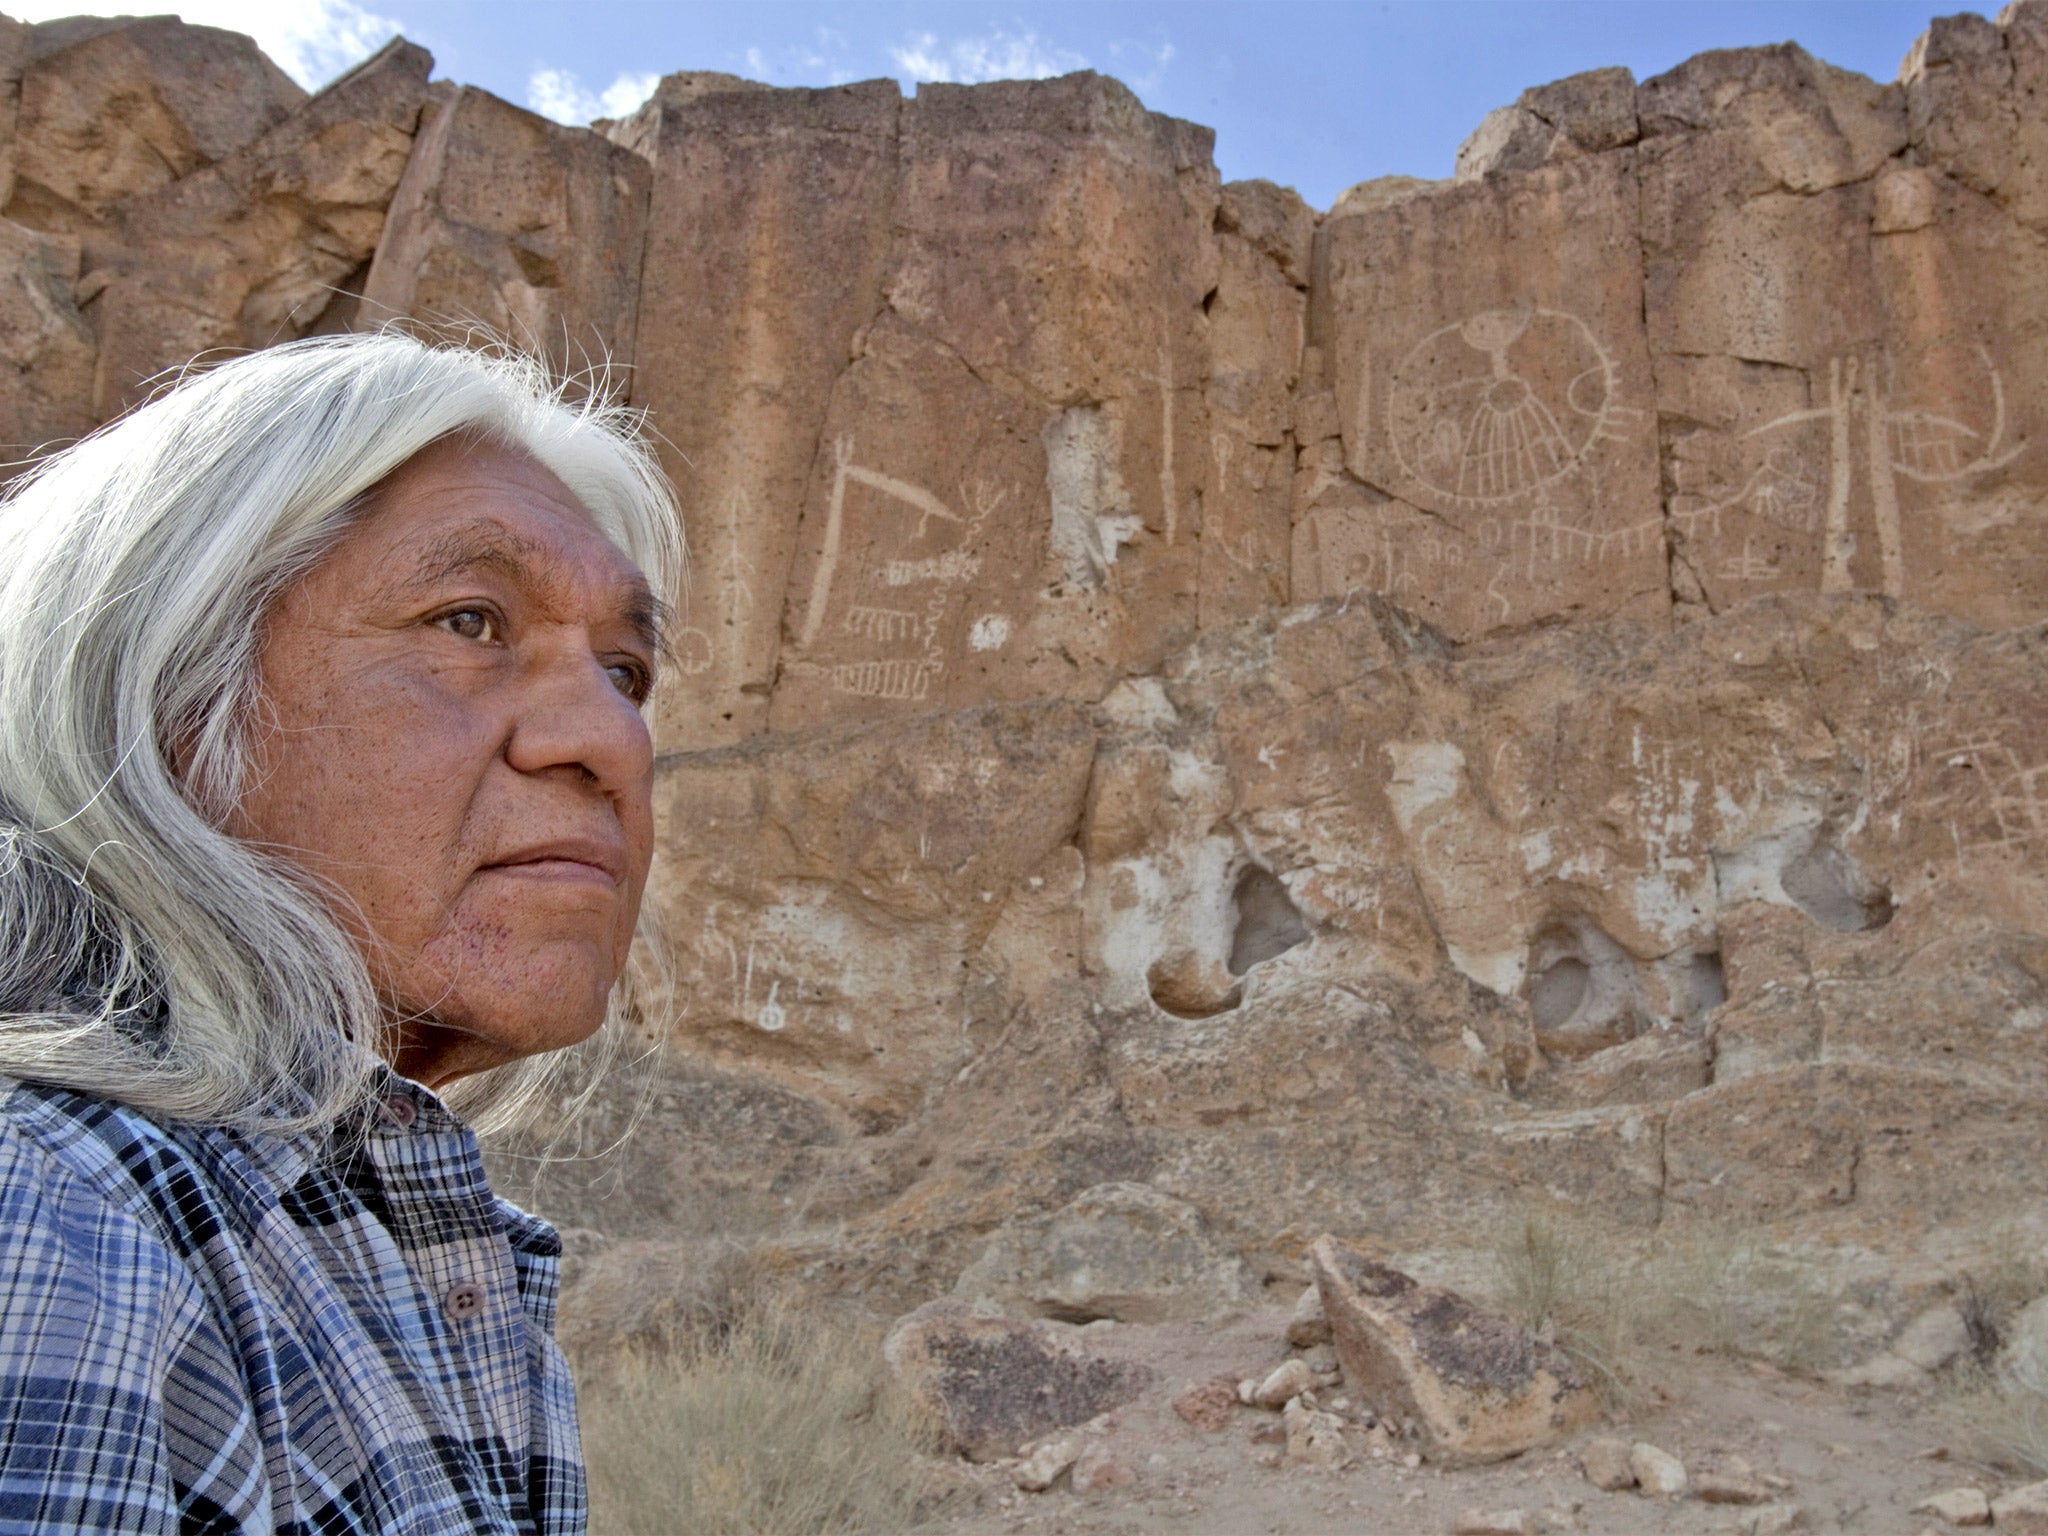 Raymond Andrews, the local tribal historical preservation officer, examines the damage